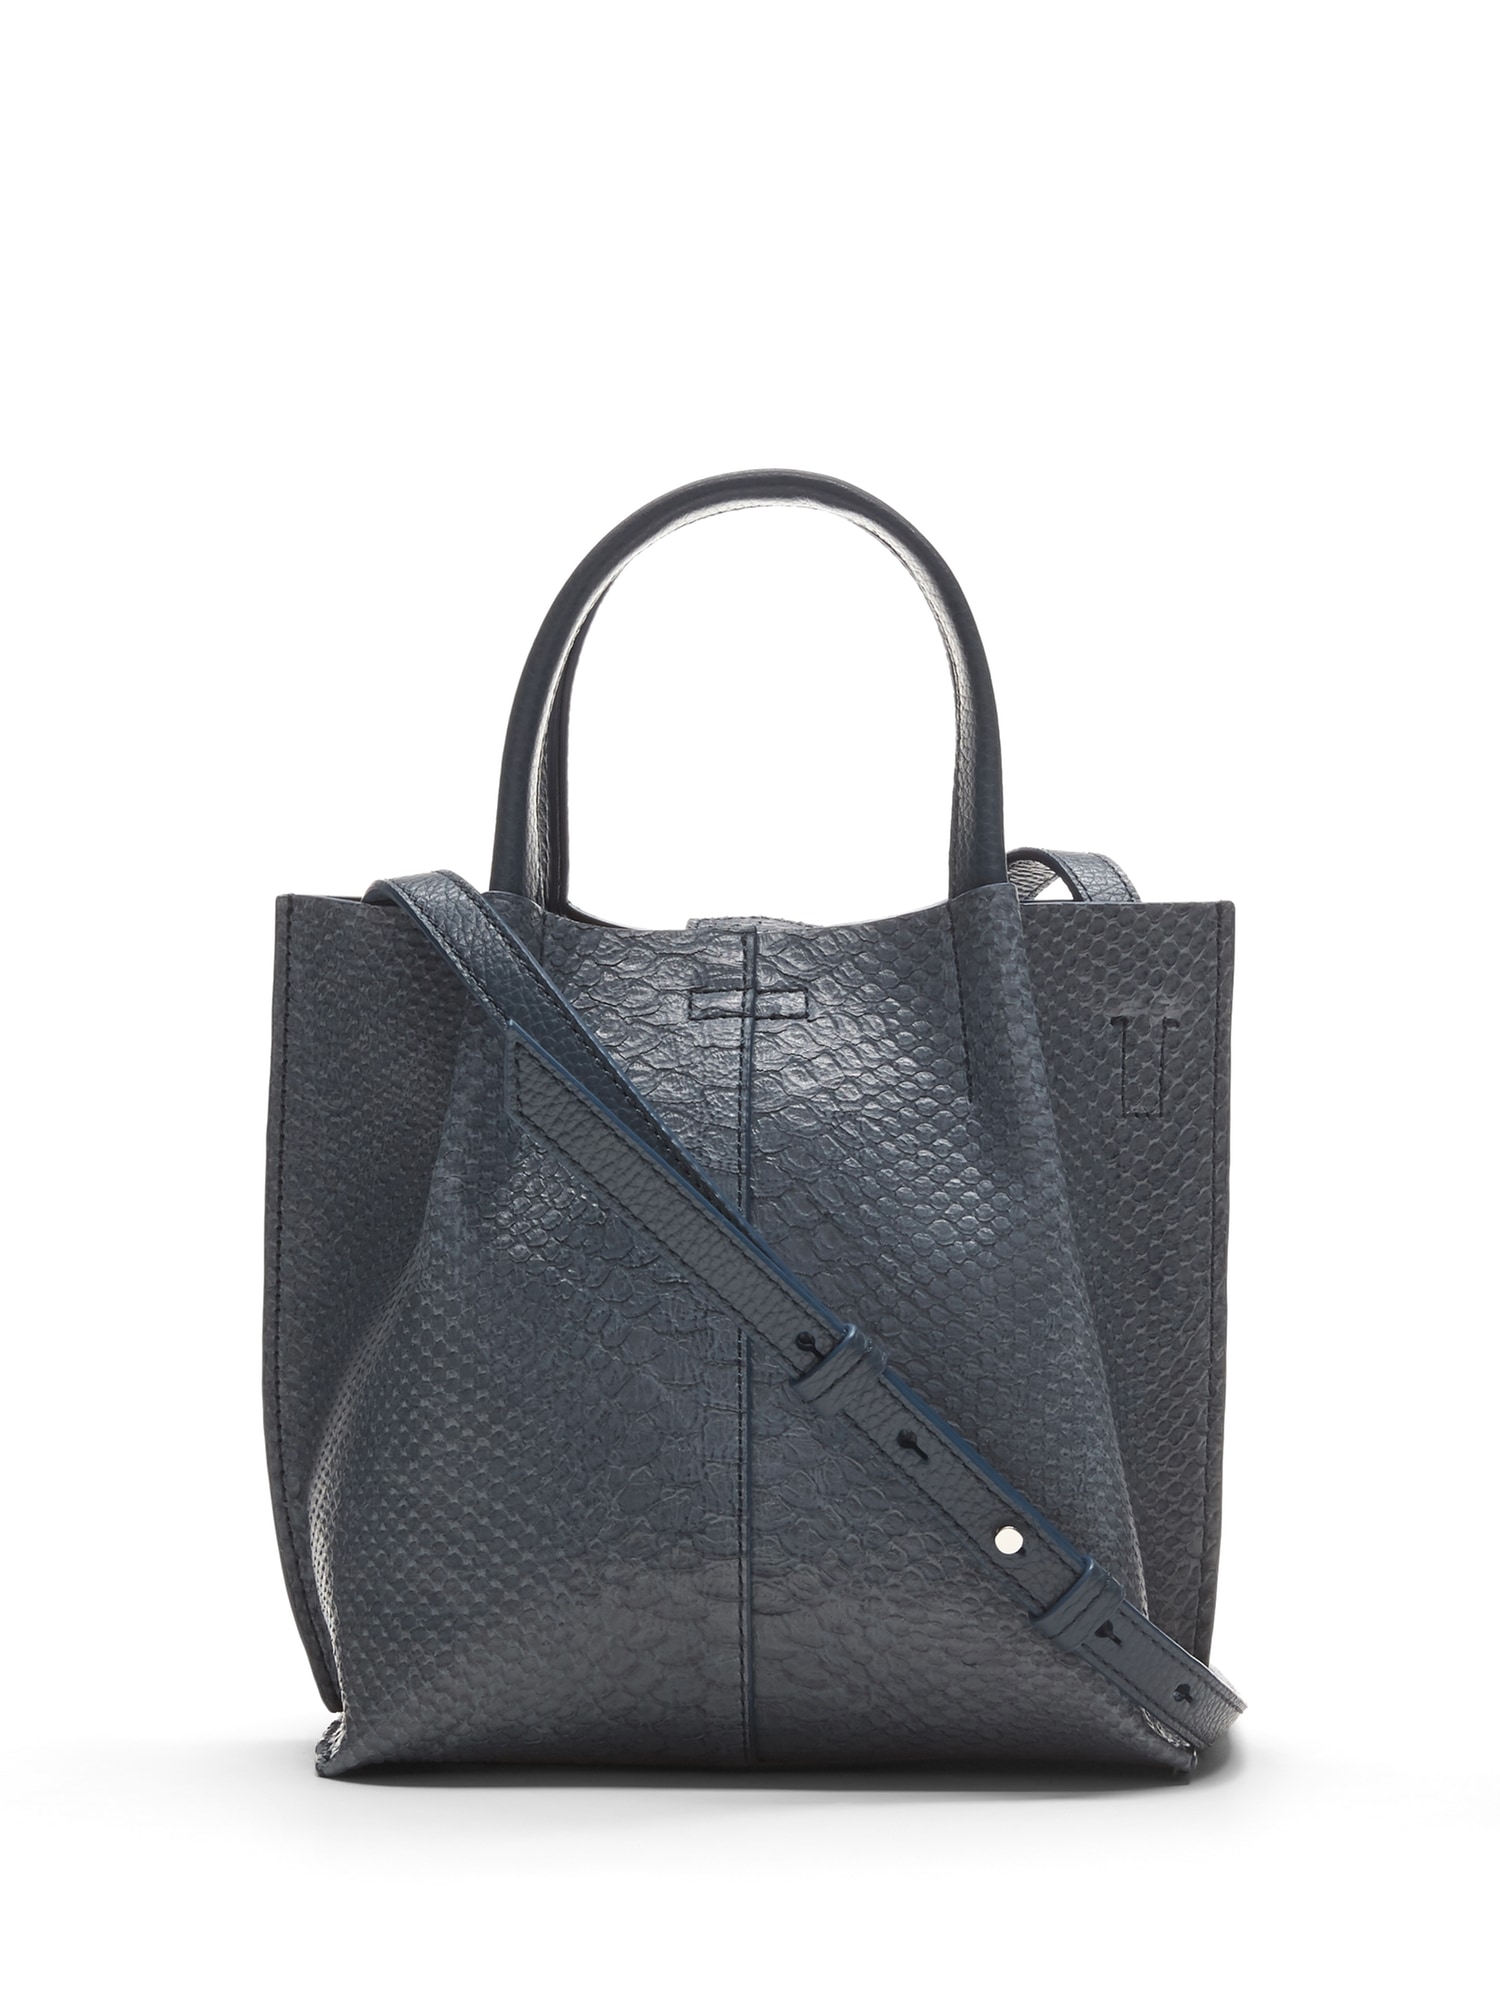 Snake-Effect Italian Leather Mini Structured Tote